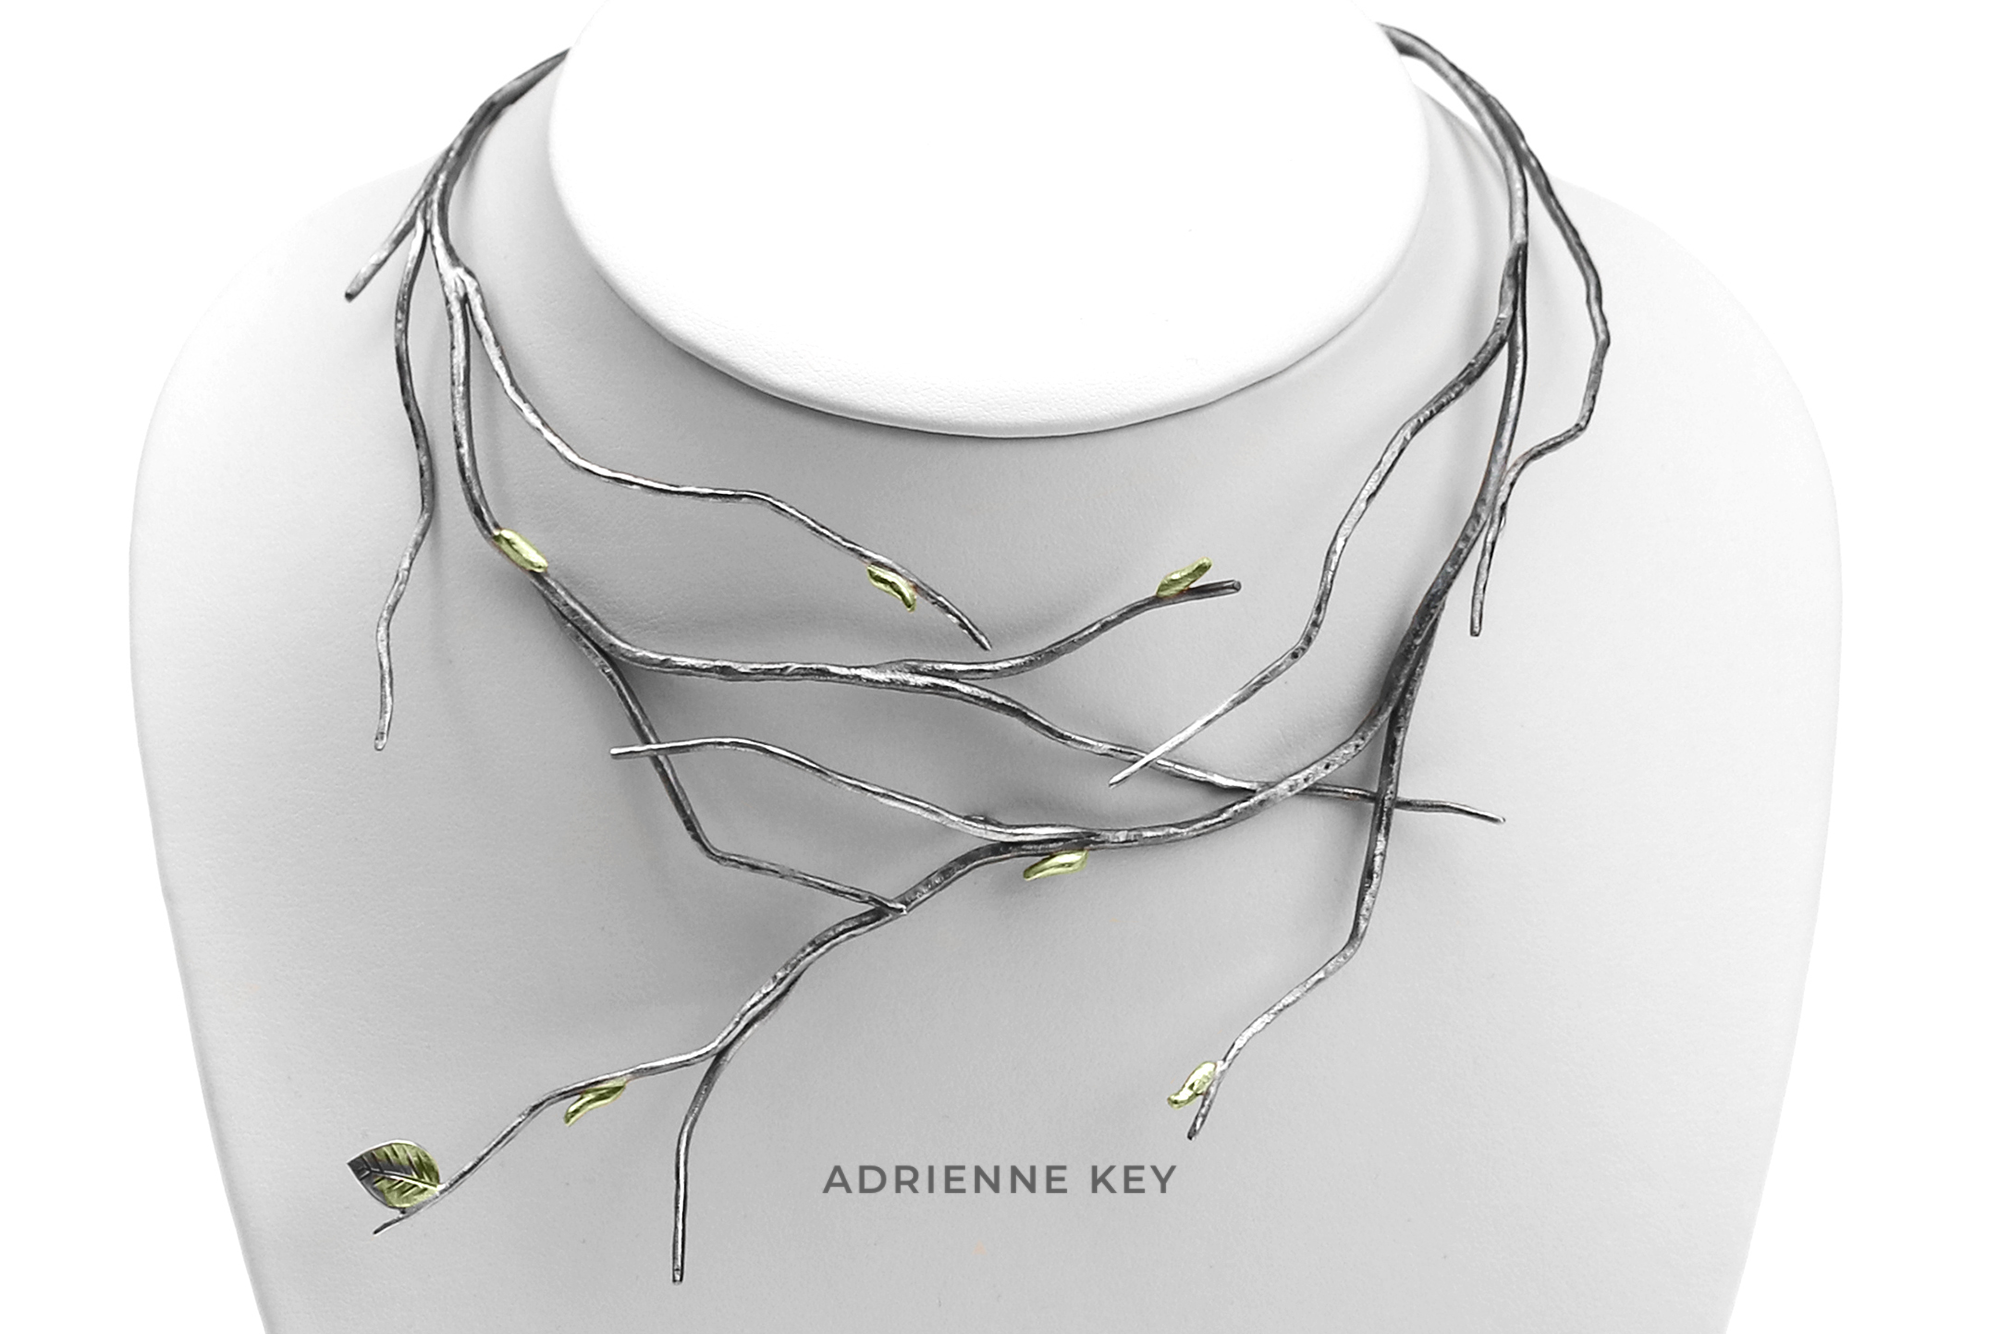 Hand fabricated blackened silver branches necklace collar with 14k green gold leaves